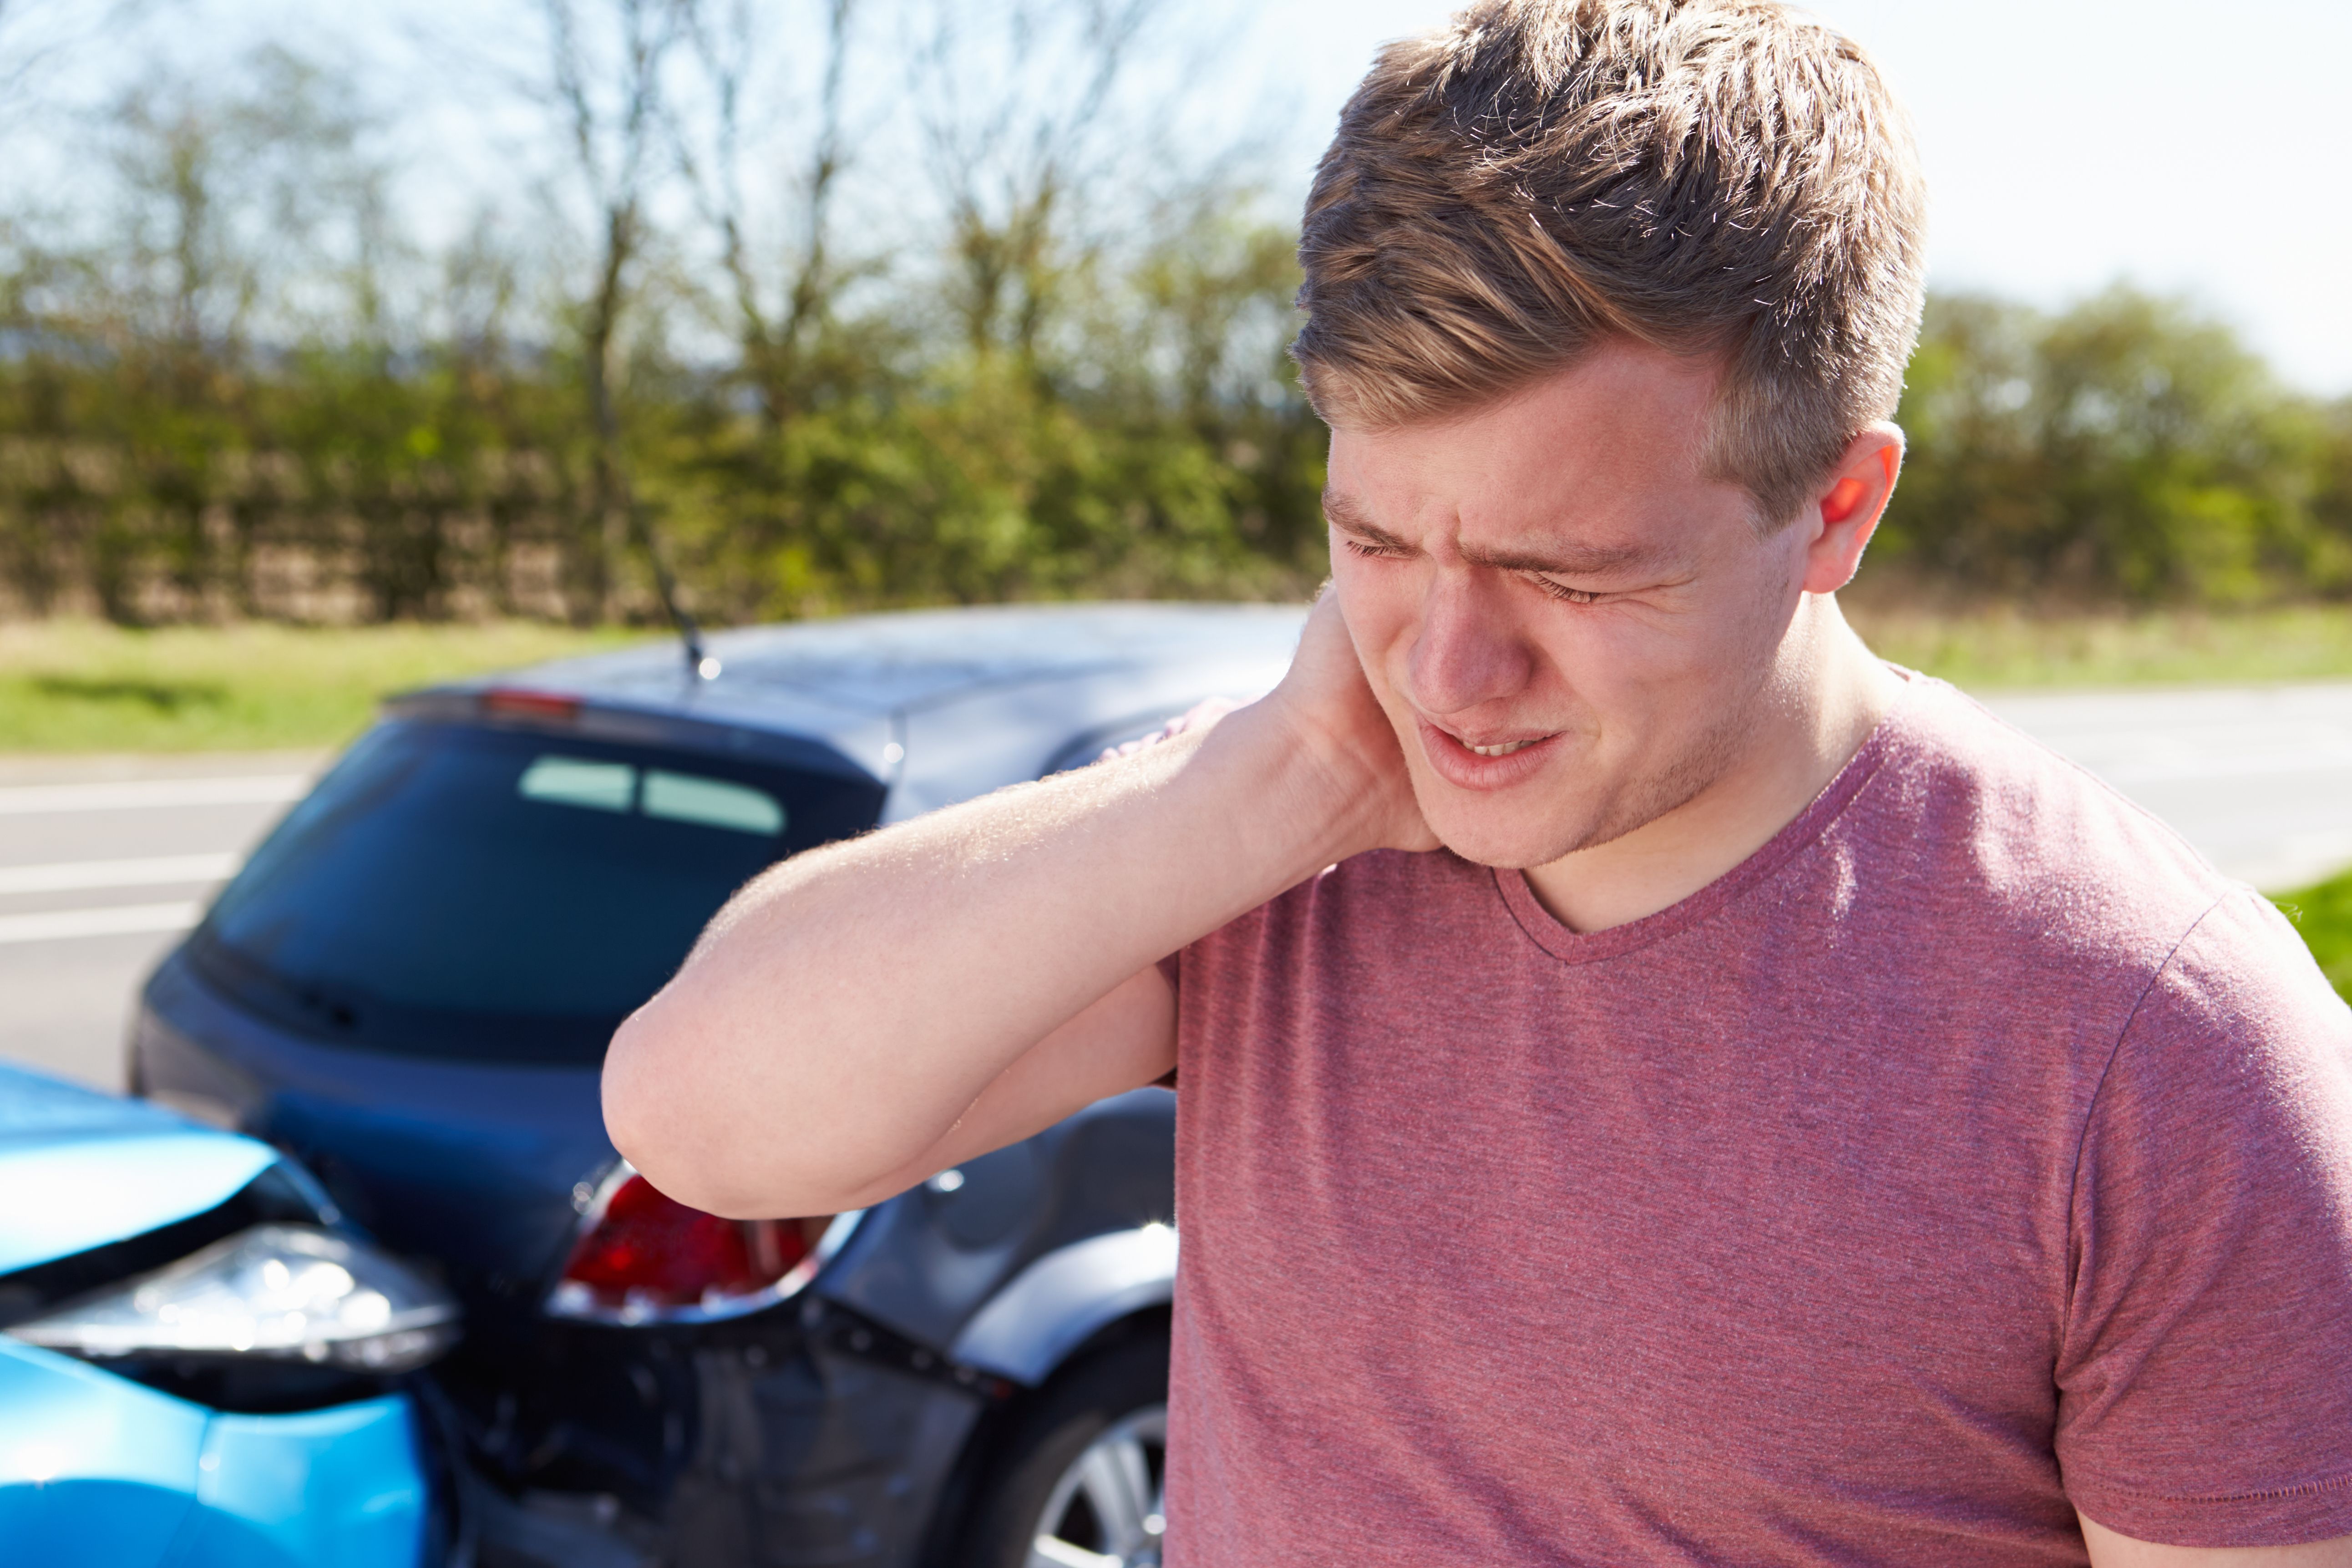 Signs and Symptoms of Whiplash